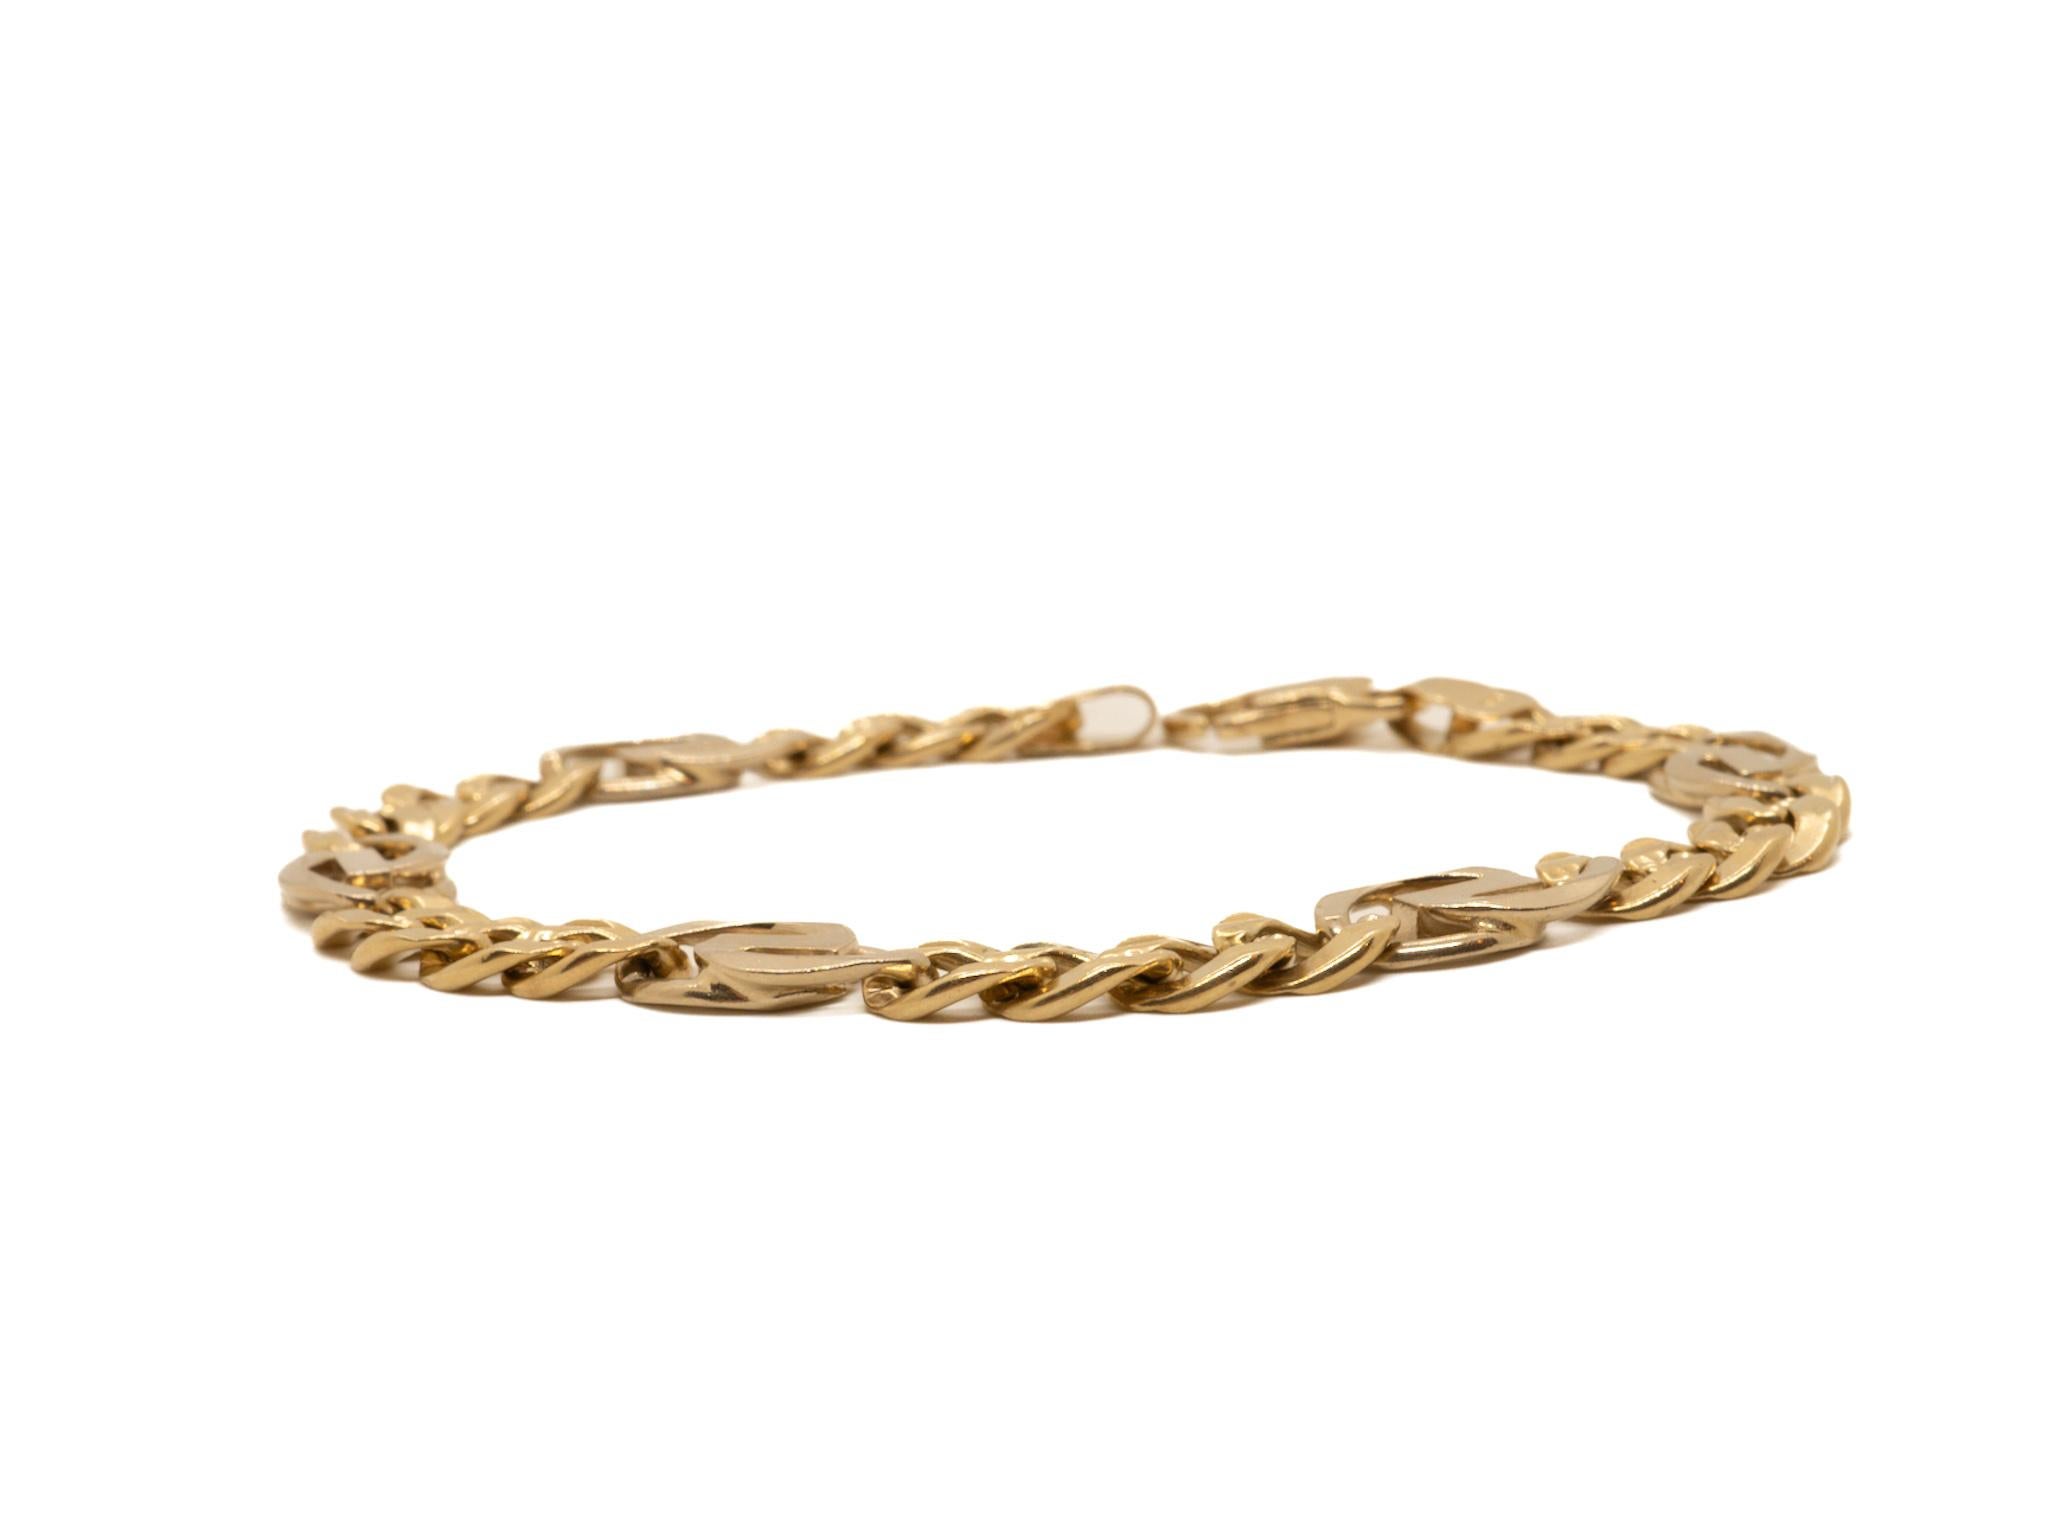 Introduce a touch of boldness and masculinity with this men's slave-style bracelet made of 14k yellow gold. With a weight of 25.5 grams, it is a substantial piece that commands attention.

The bracelet features a sleek and polished design, crafted